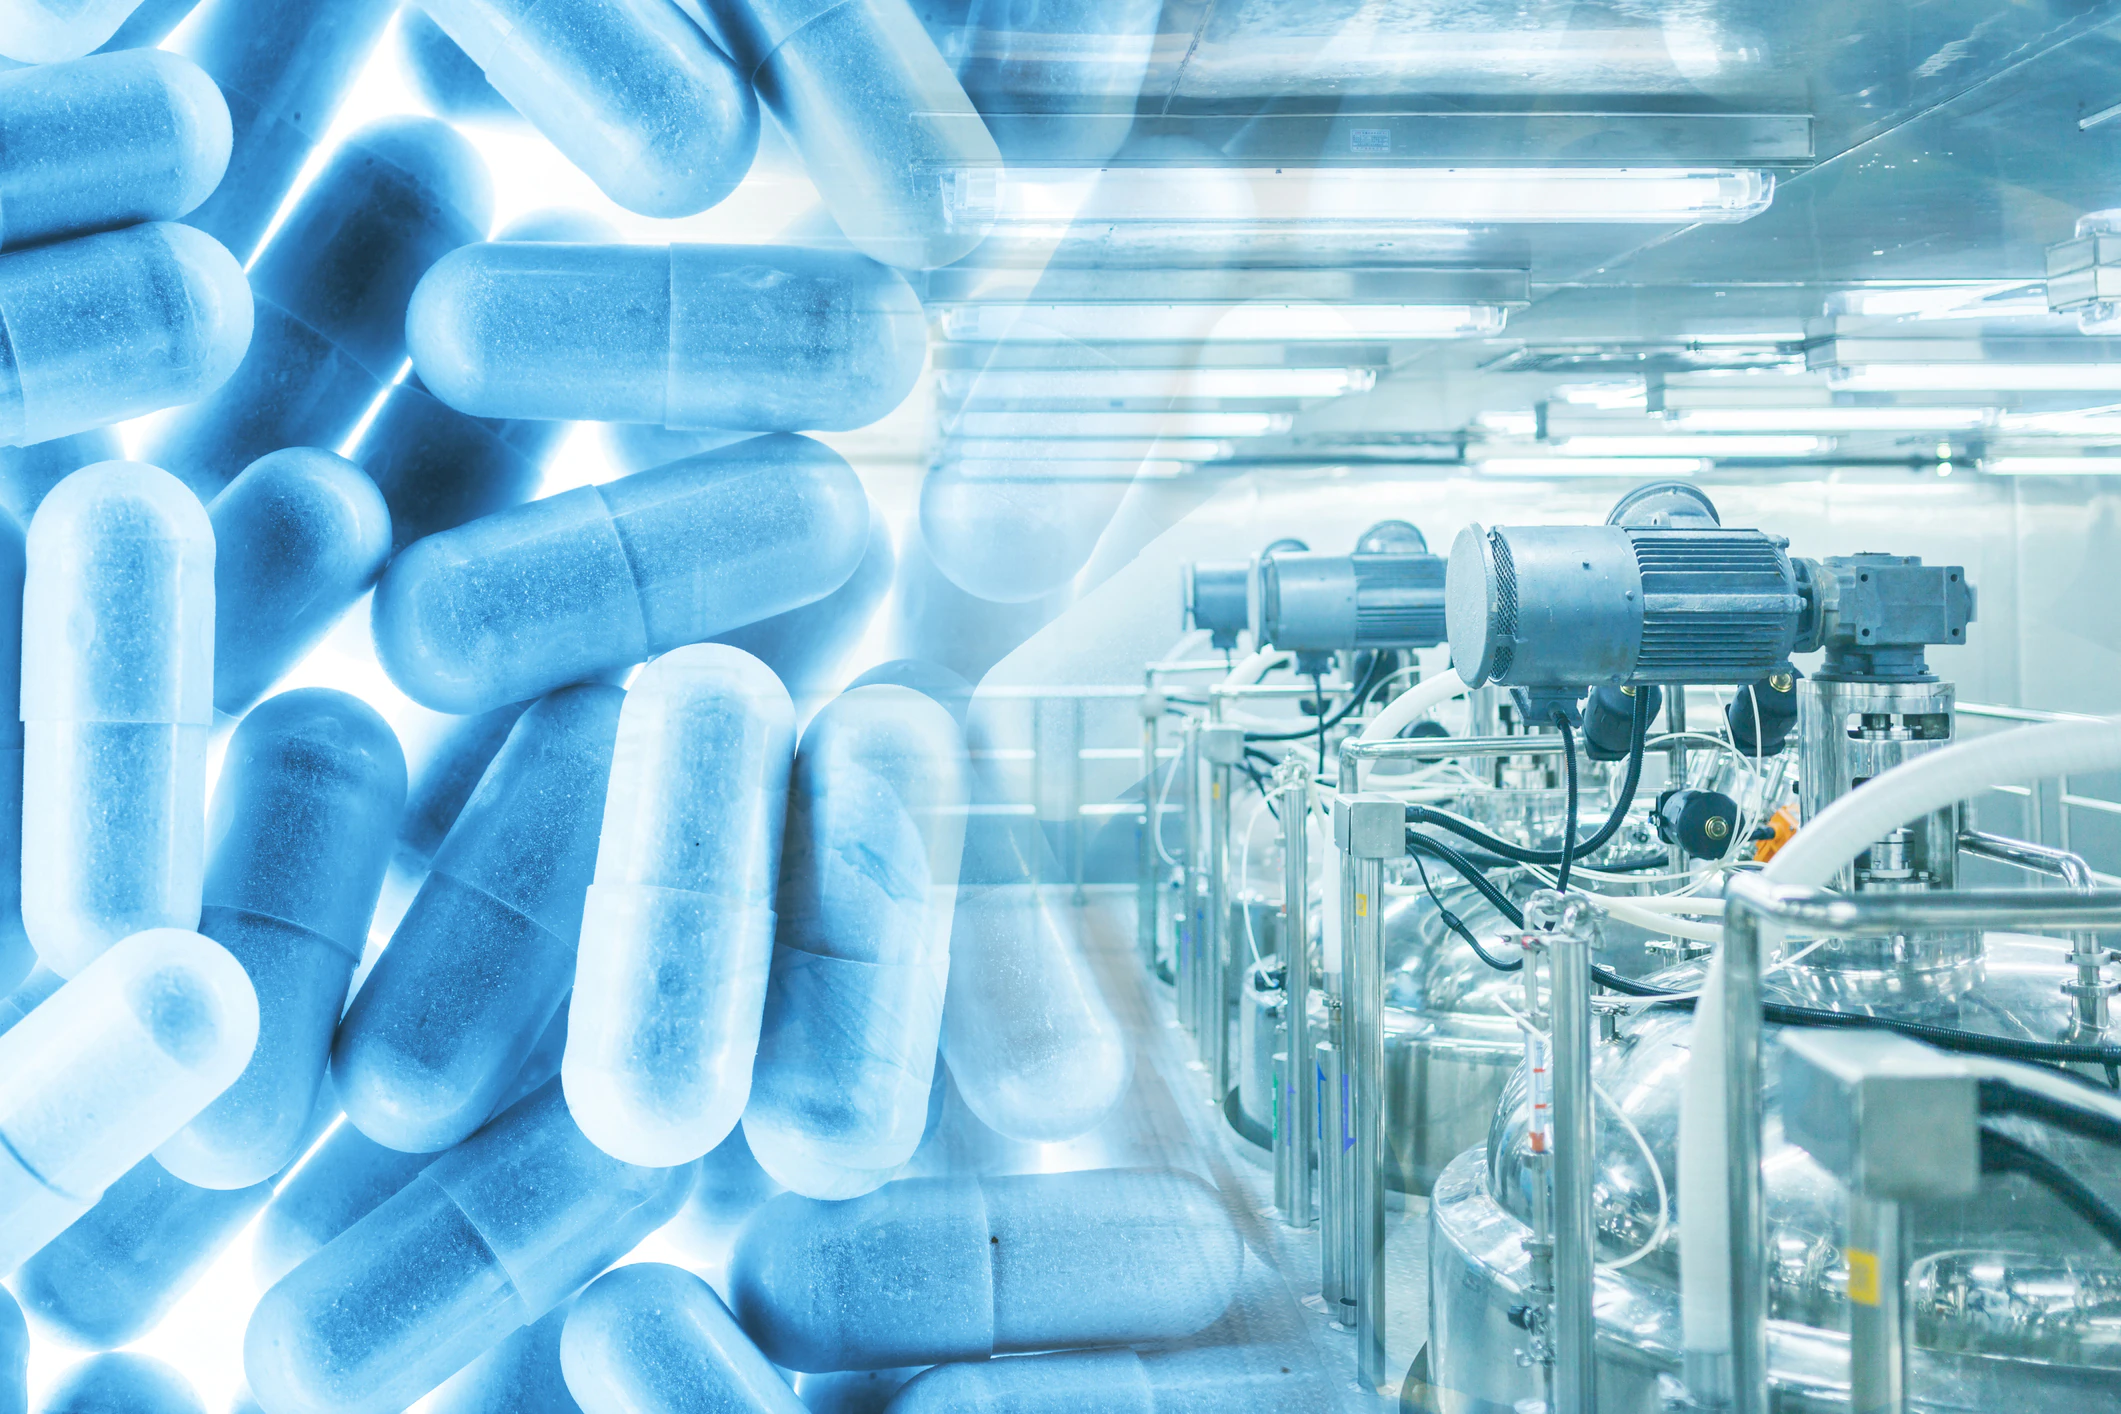 Enhancing Healthcare with Smart Factory and Supply Chain Innovations